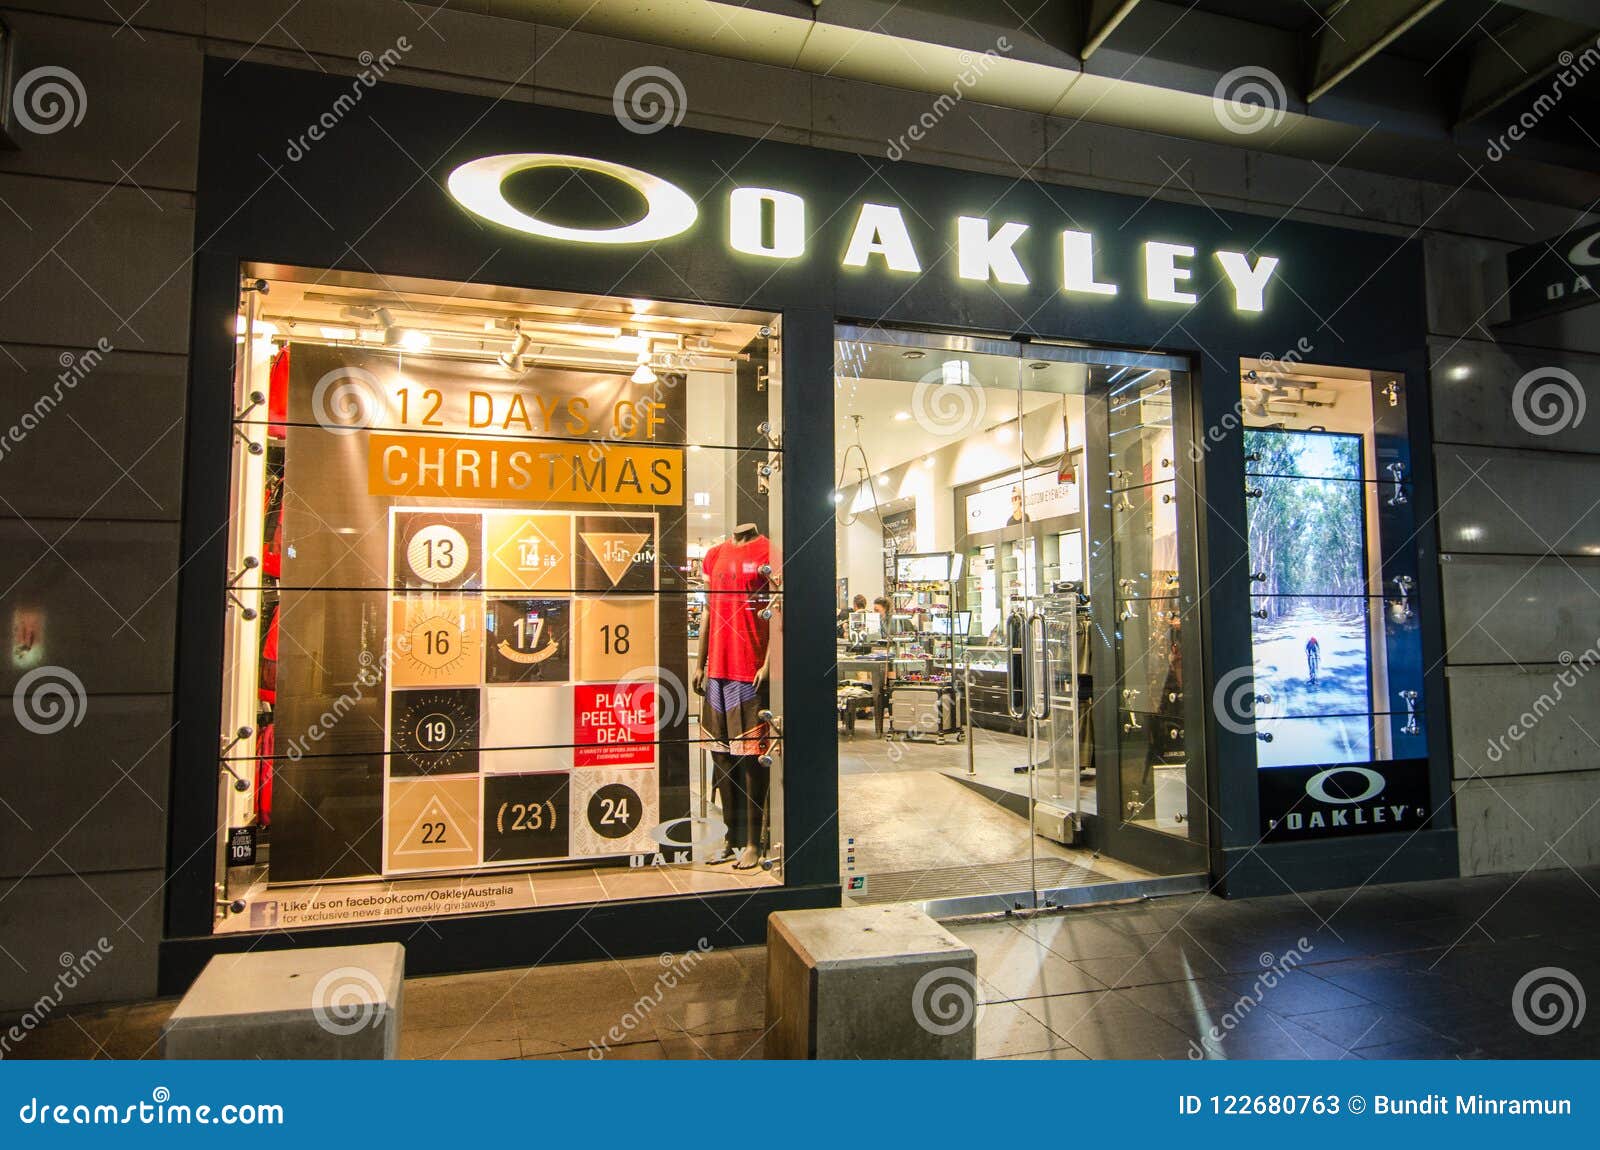 Oakley Fashion Clothing And Sports 